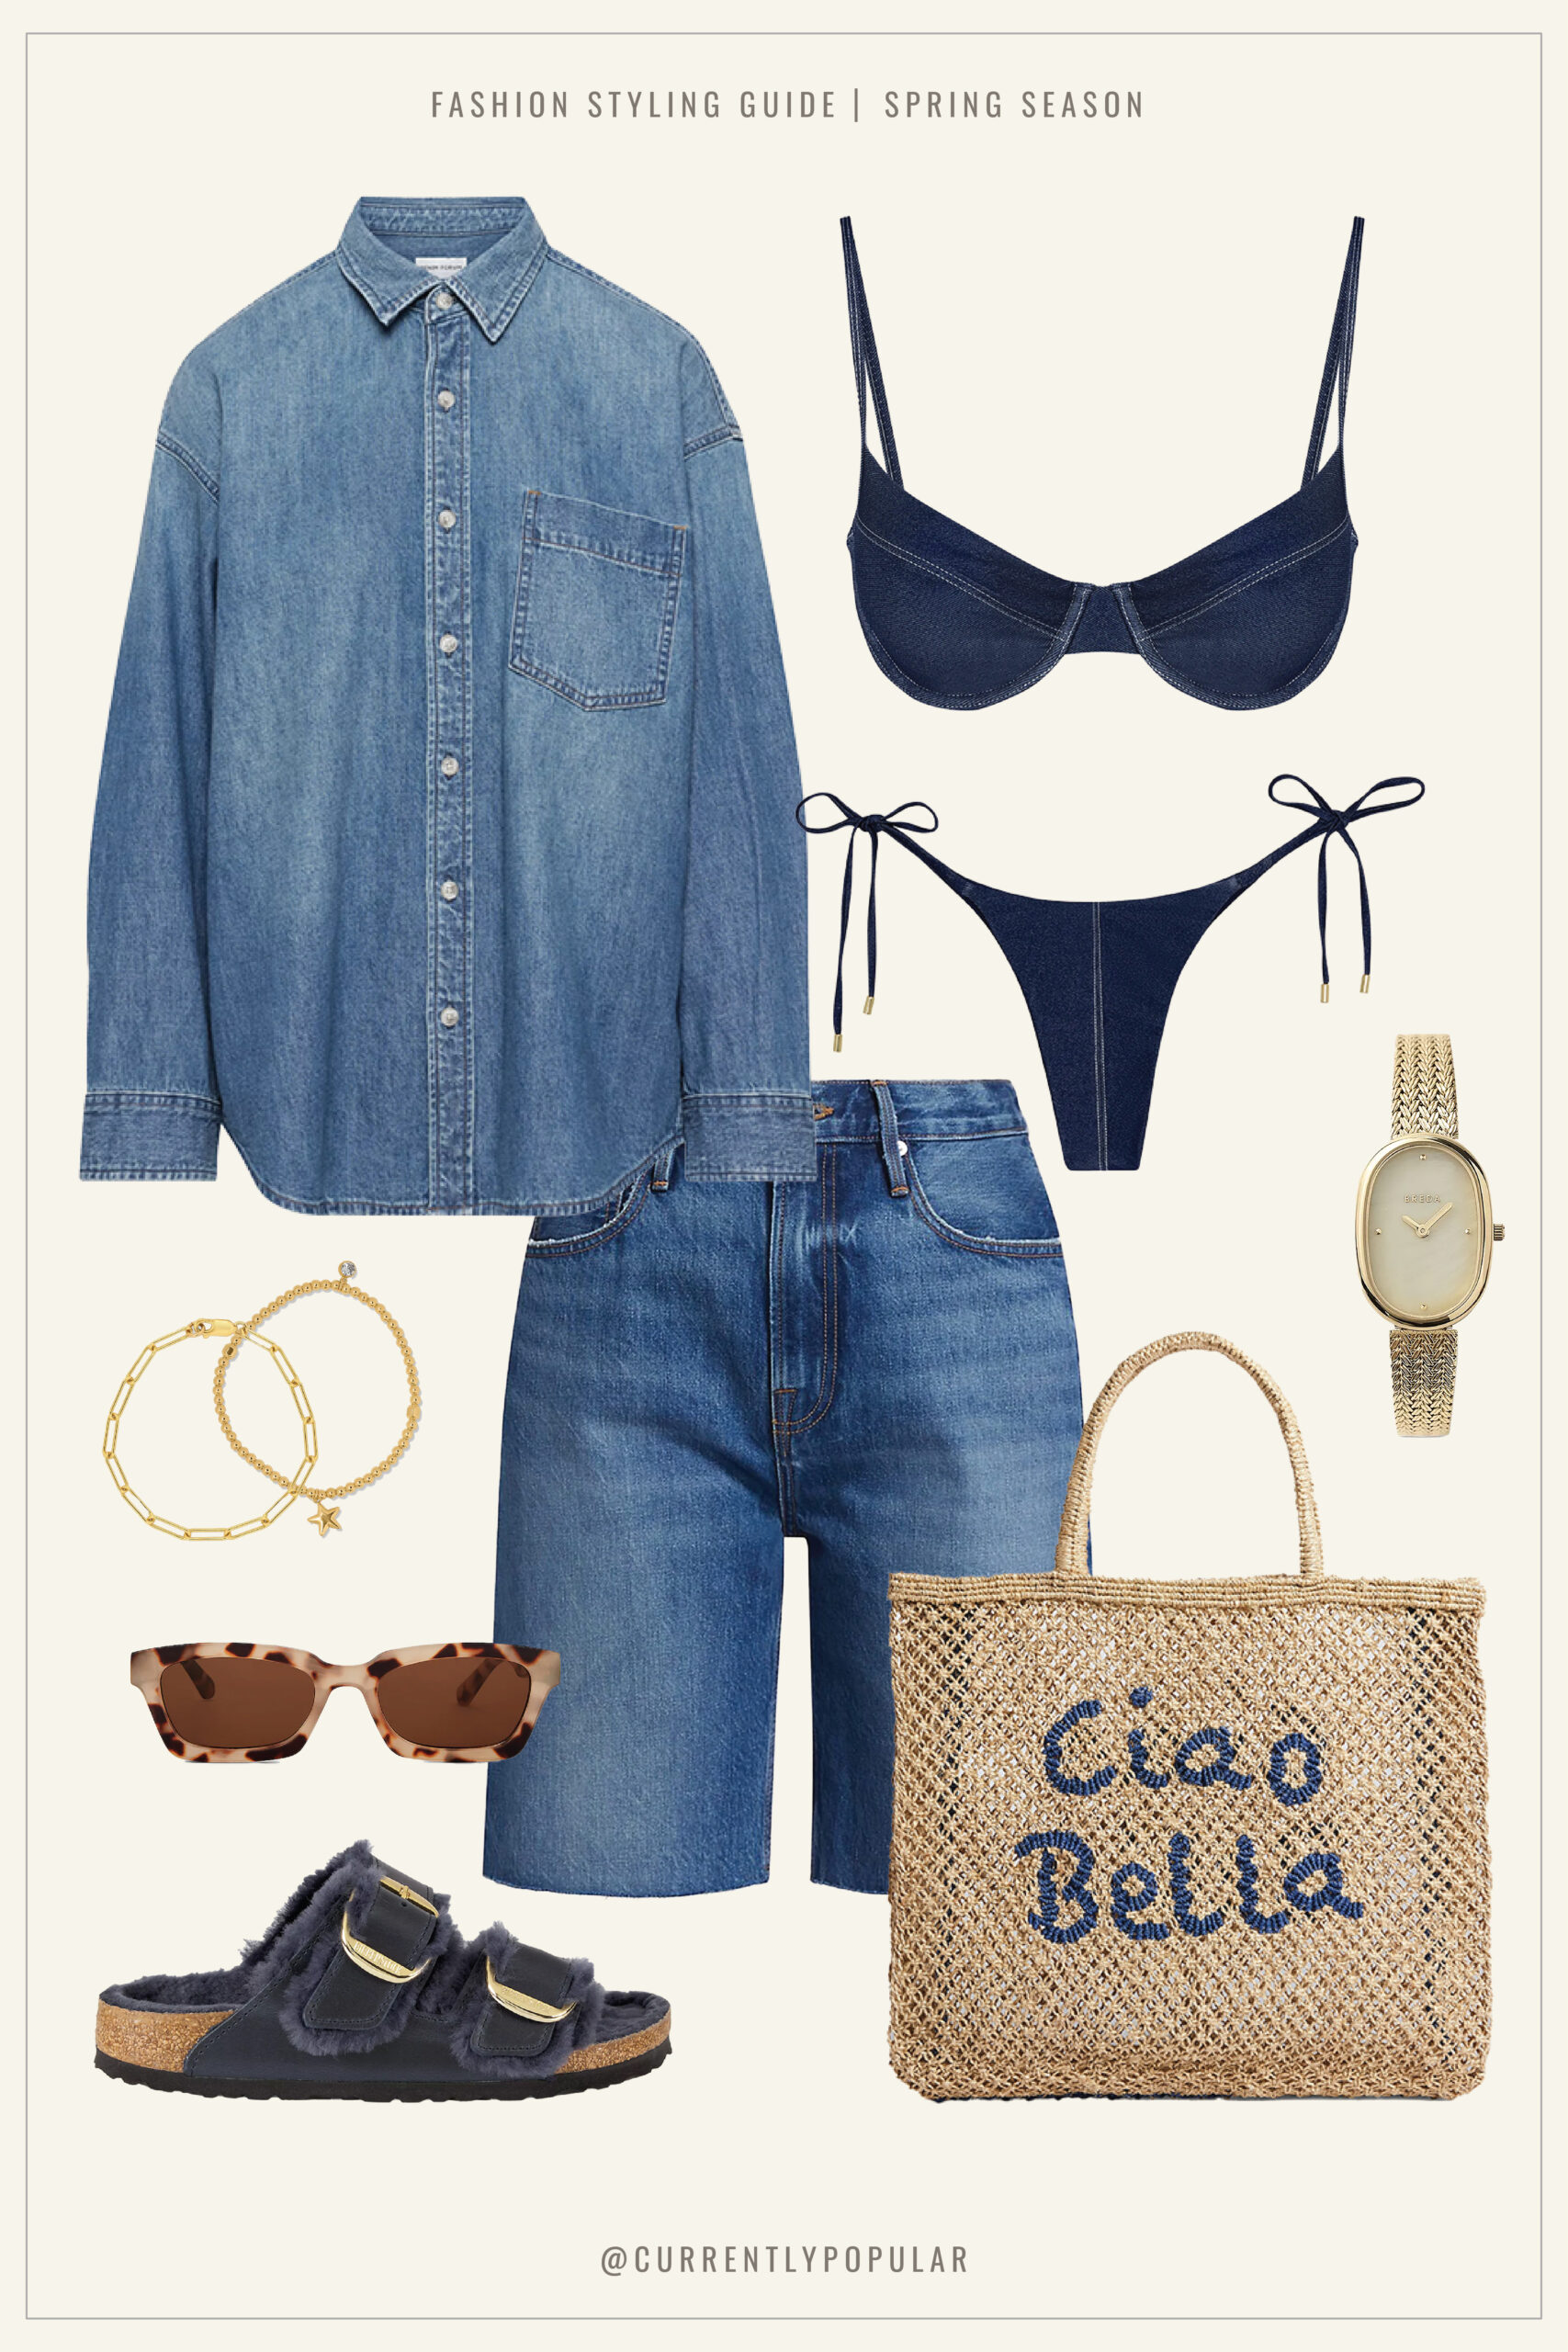 Fashion styling guide for Spring showing a casual denim ensemble with a classic button-up denim shirt and dark denim bikini top & bottom. Complemented by denim shorts, the look is accessorized with a gold mesh watch, gold bracelets with a star charm, tortoiseshell sunglasses, and navy Birkenstock sandals. A jute tote bag with the phrase "Ciao Bella" in blue adds a playful Italian flair to the outfit. Ideal for a relaxed yet stylish beach day or casual outing.